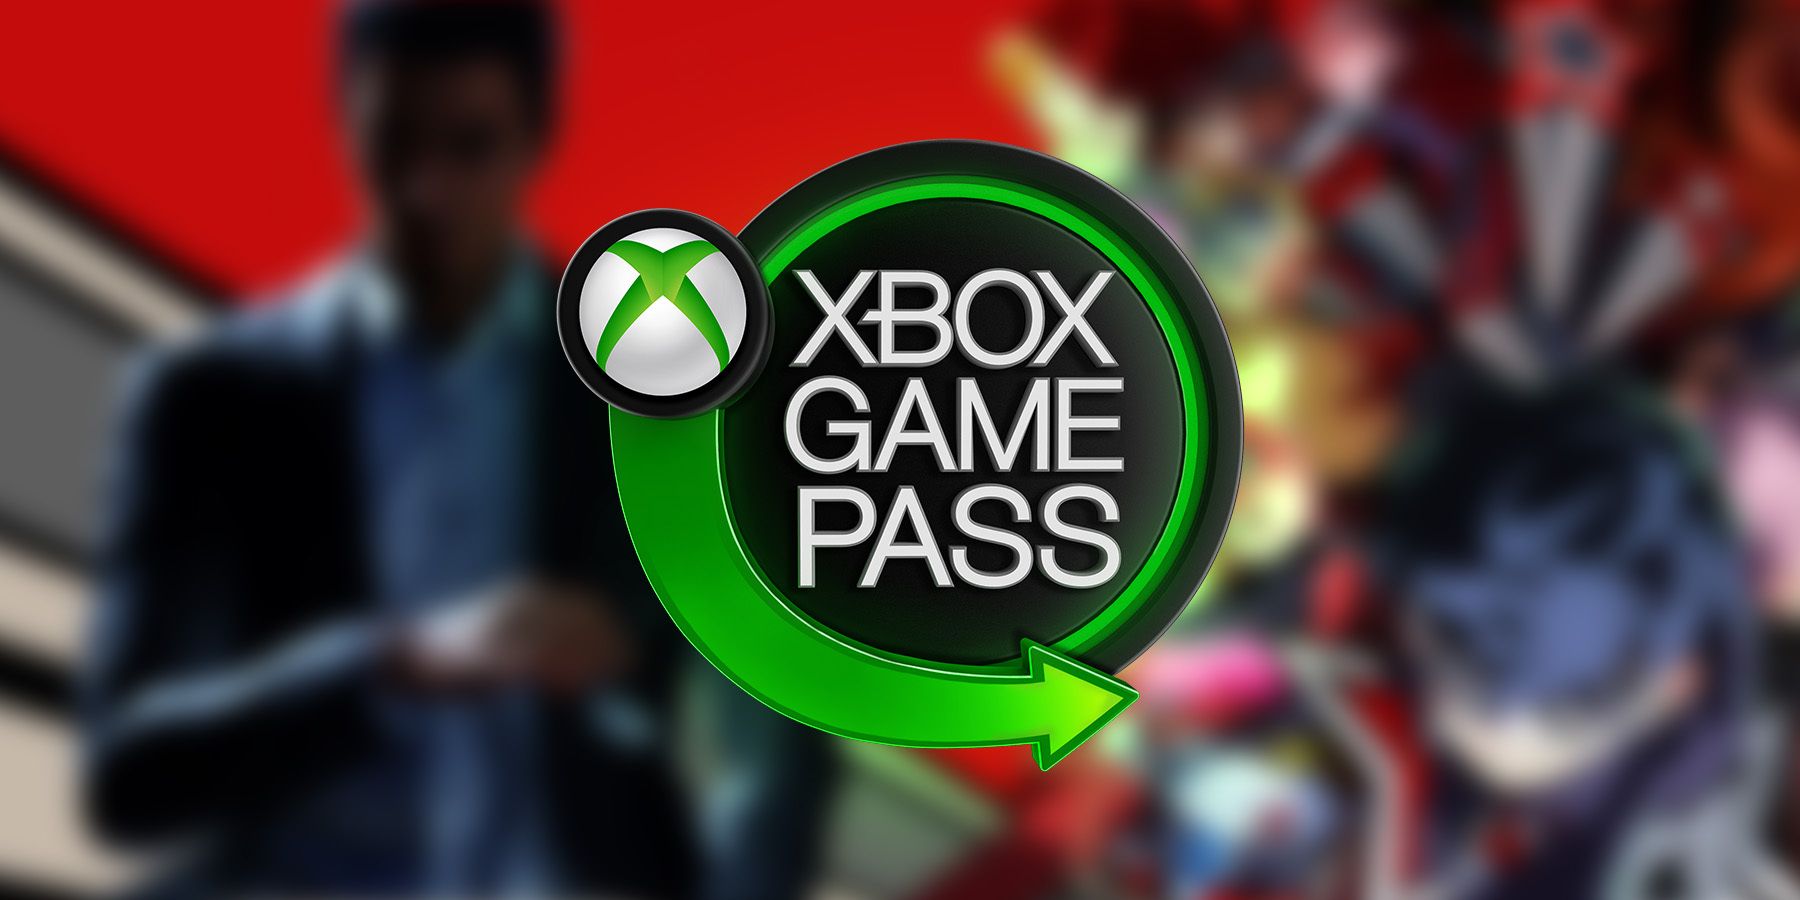 Is Persona 5 Tactica on Xbox Game Pass?